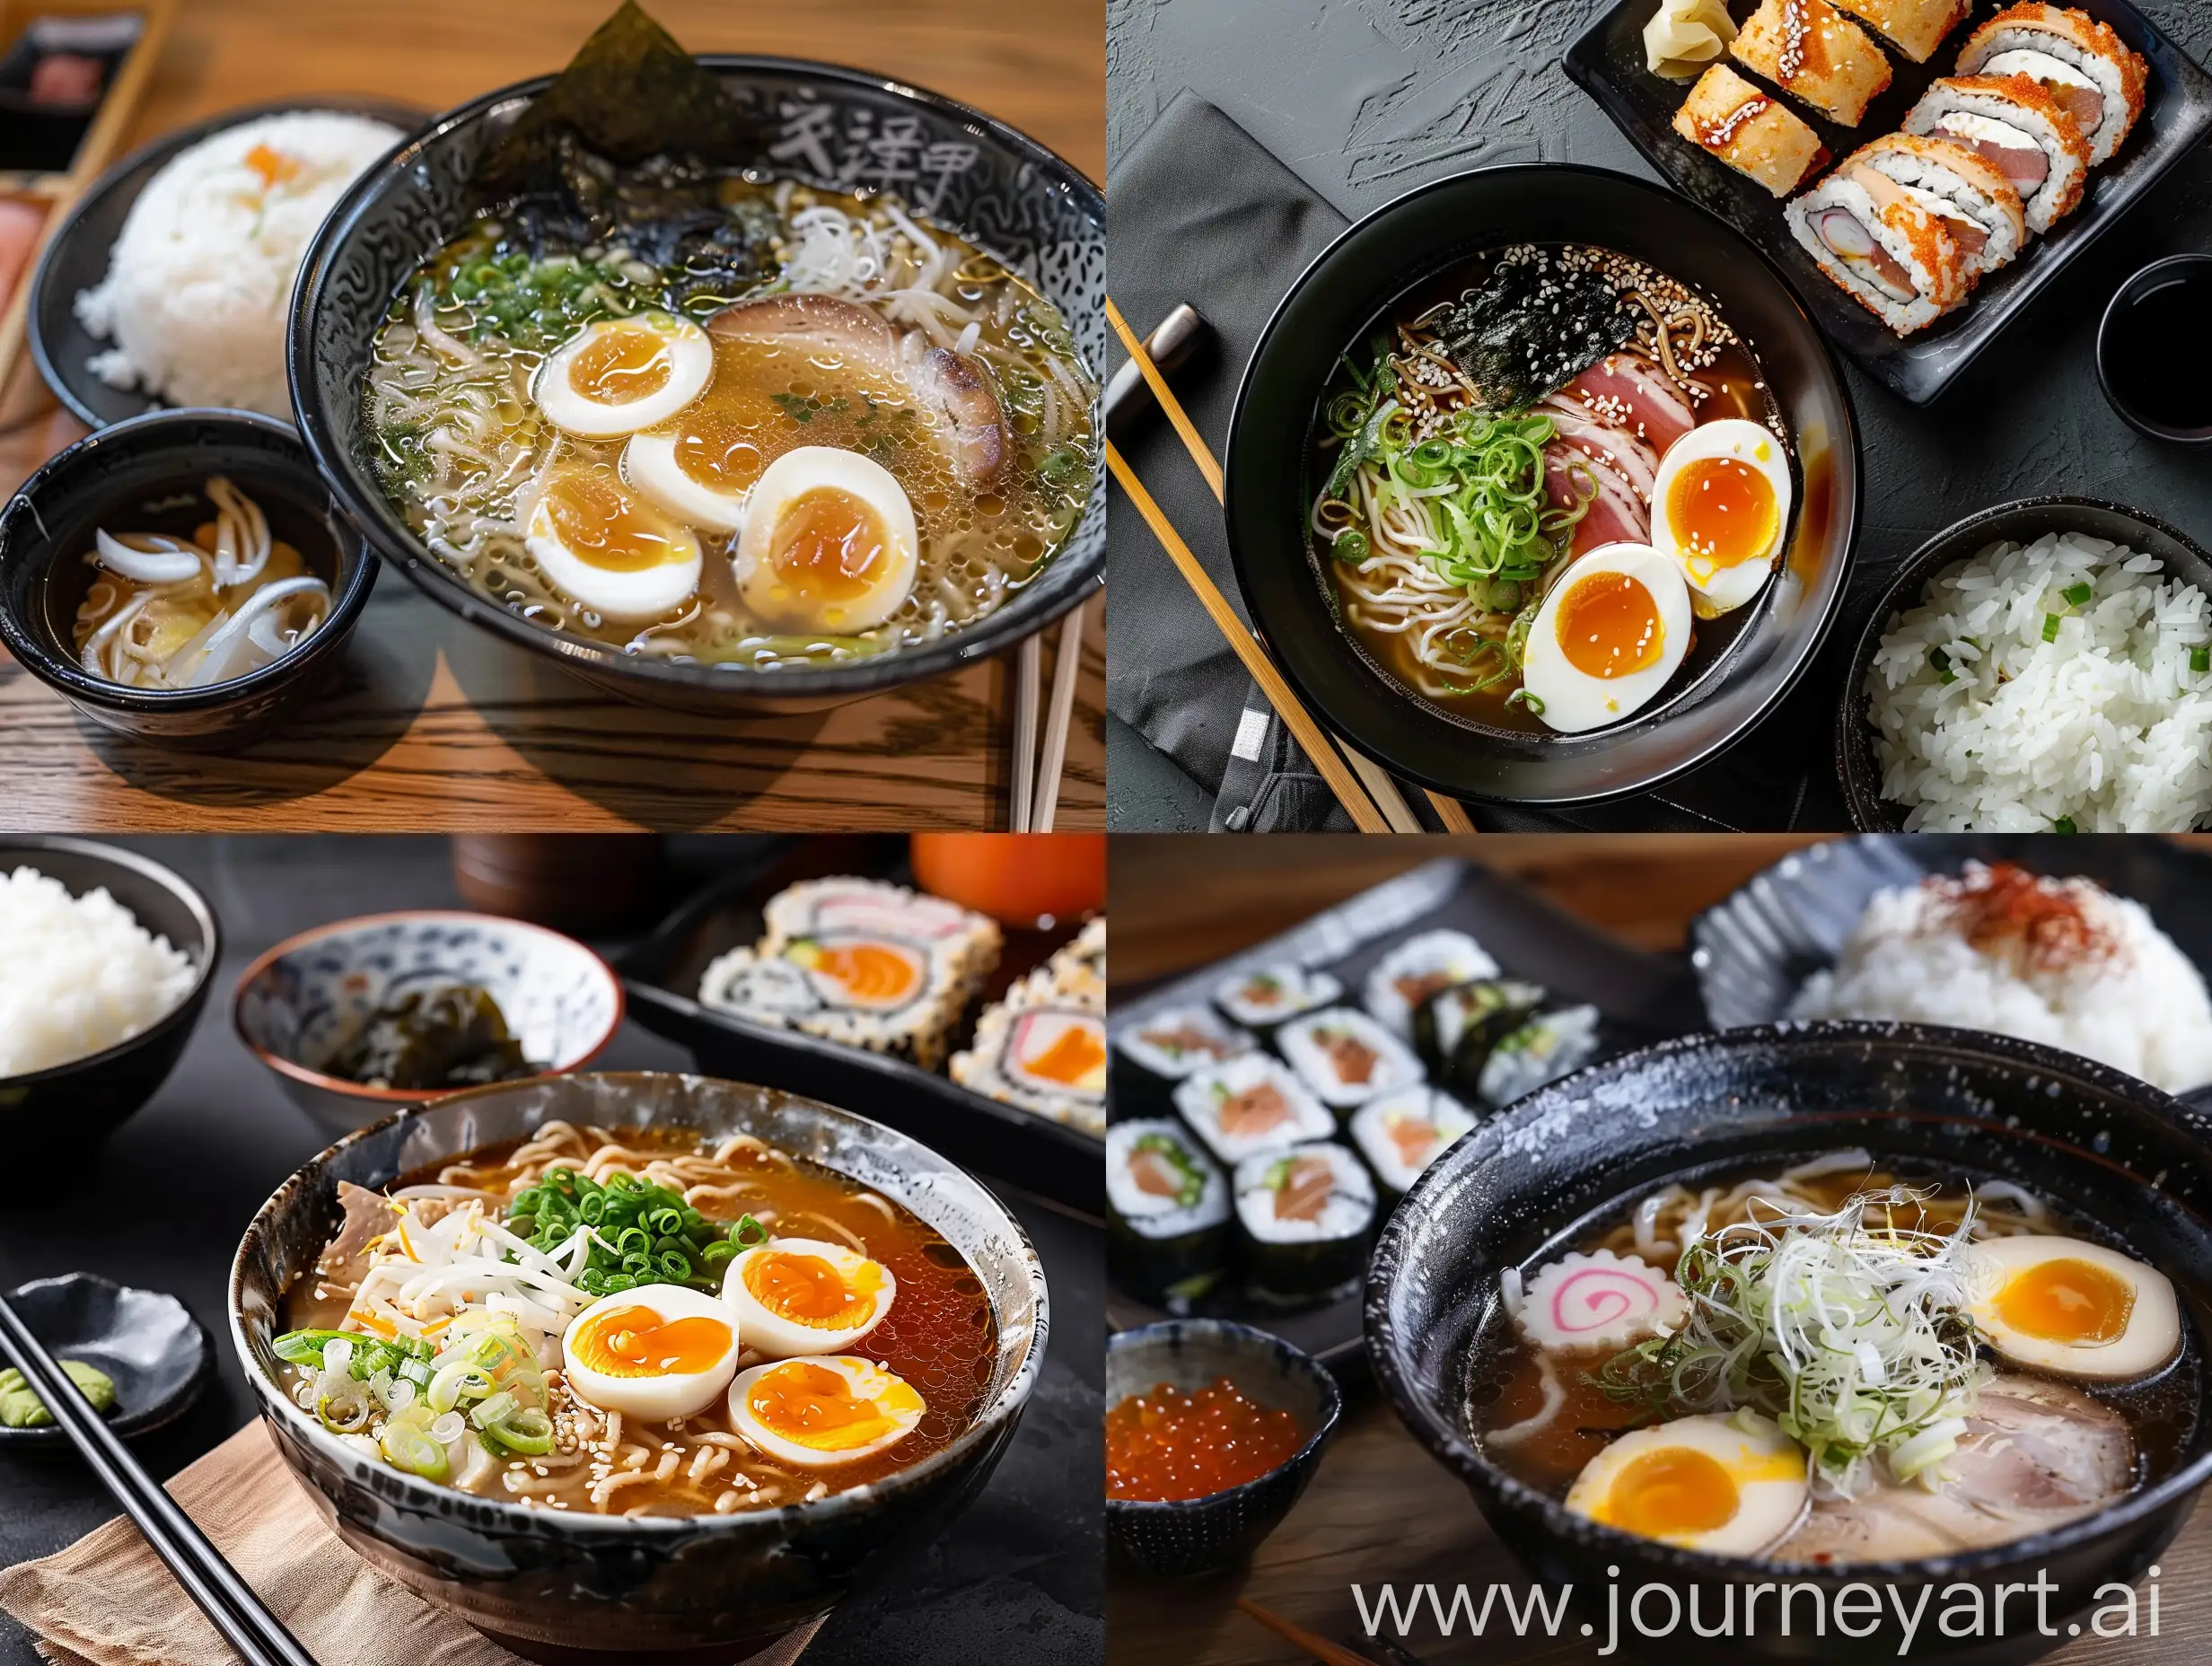 Authentic-Japanese-Cuisine-Ramen-Sushi-and-Rice-Dishes